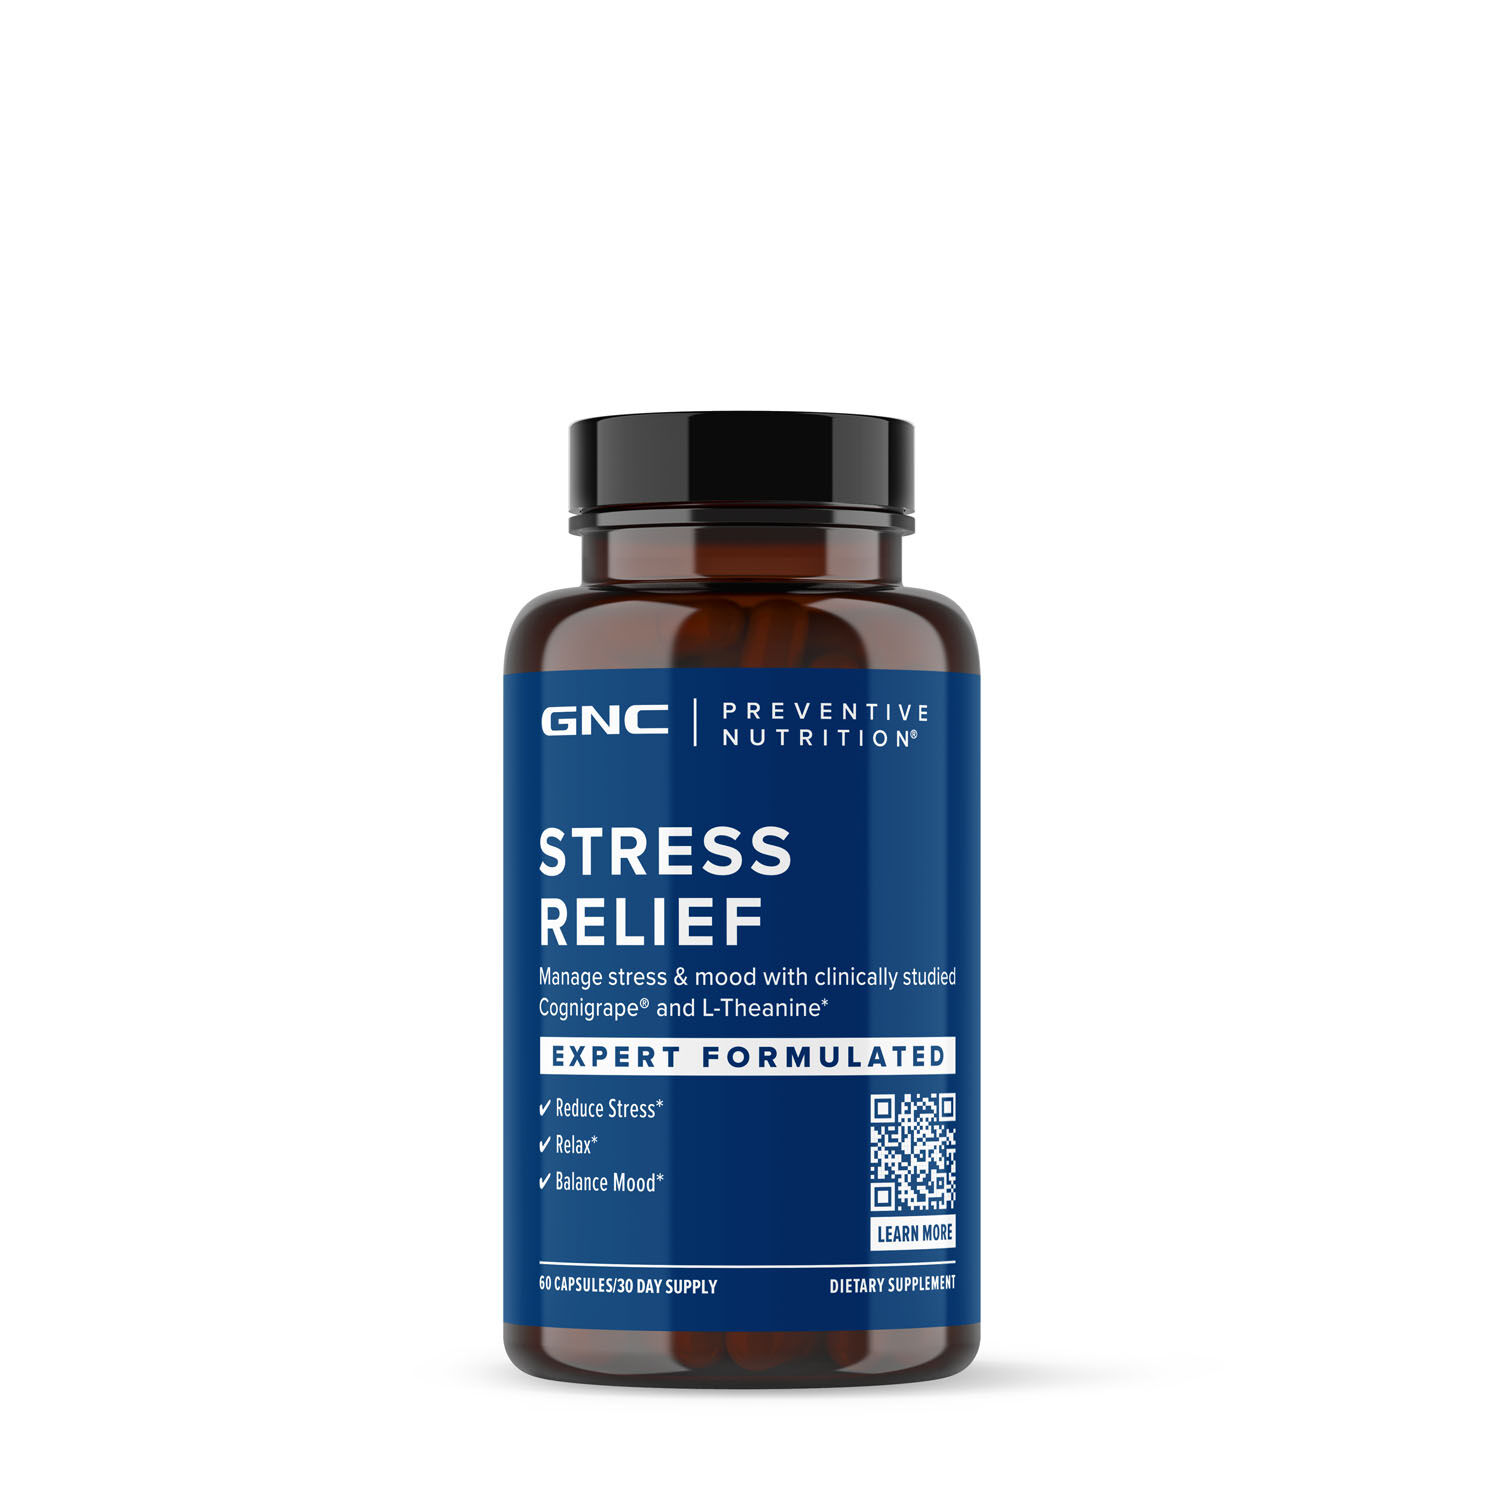 Stress Relief Supplements, Foods and Lifestyle Tips